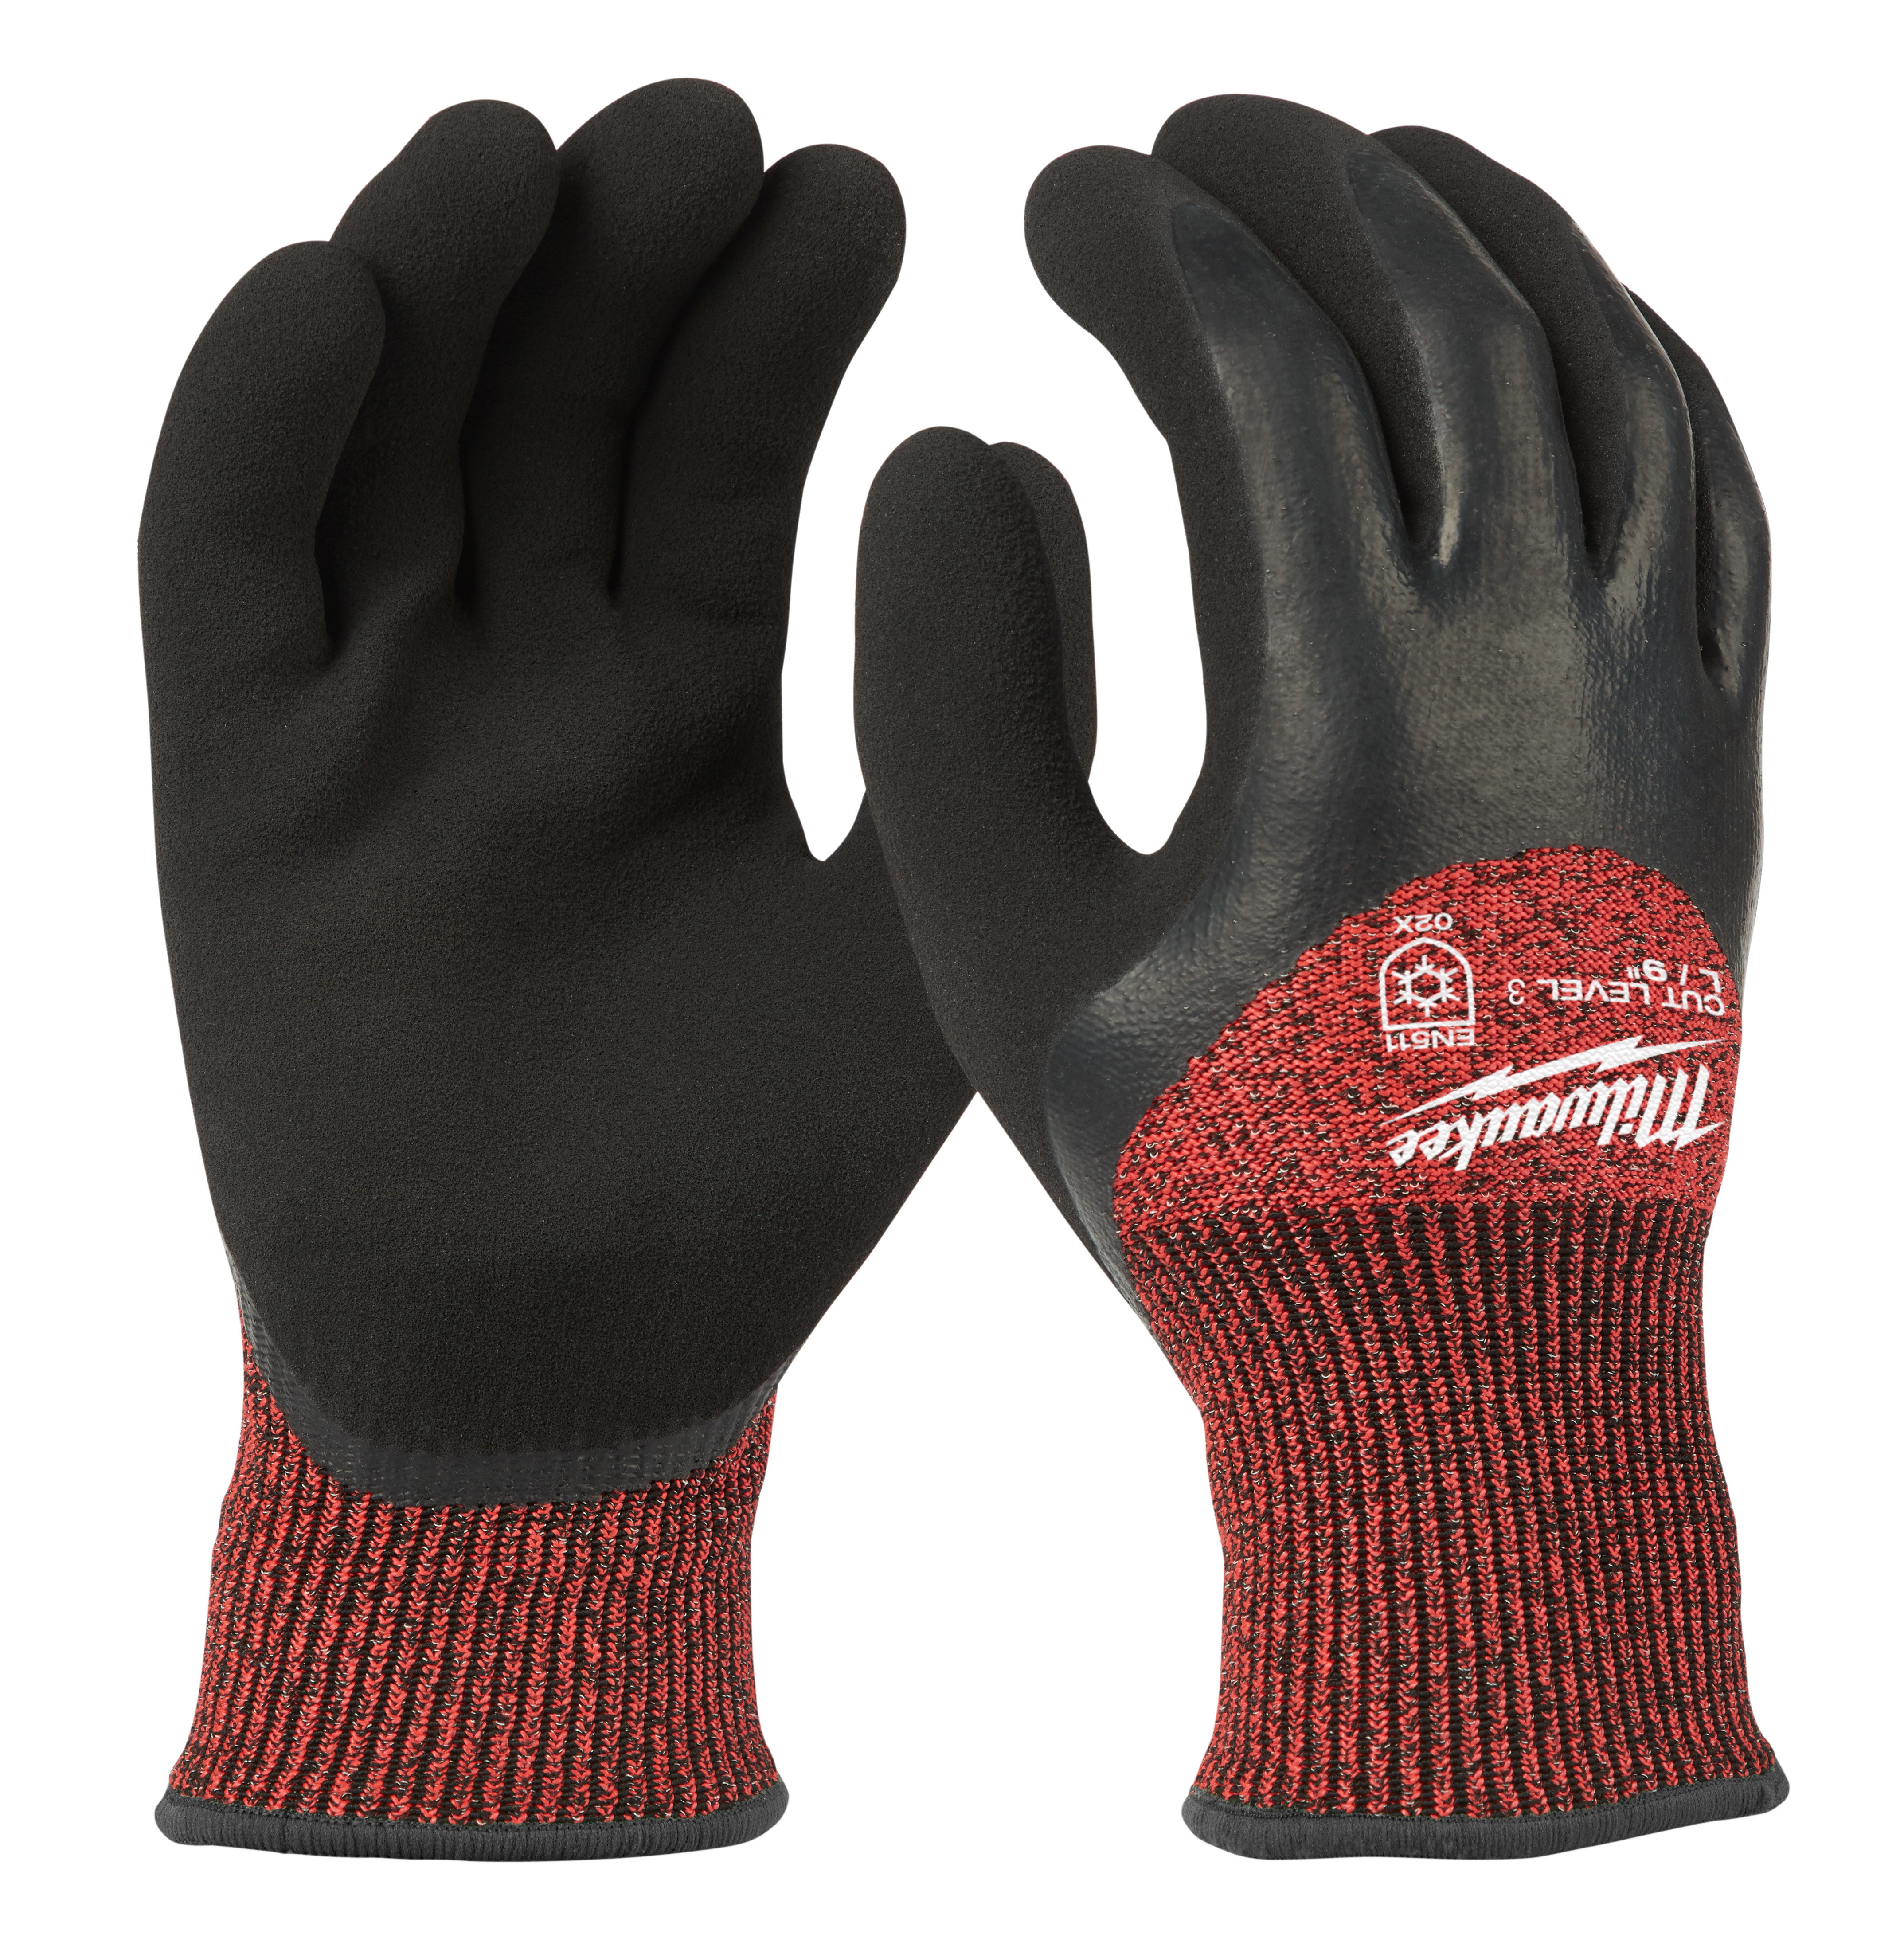 Cut Level 3 Insulated Gloves -S